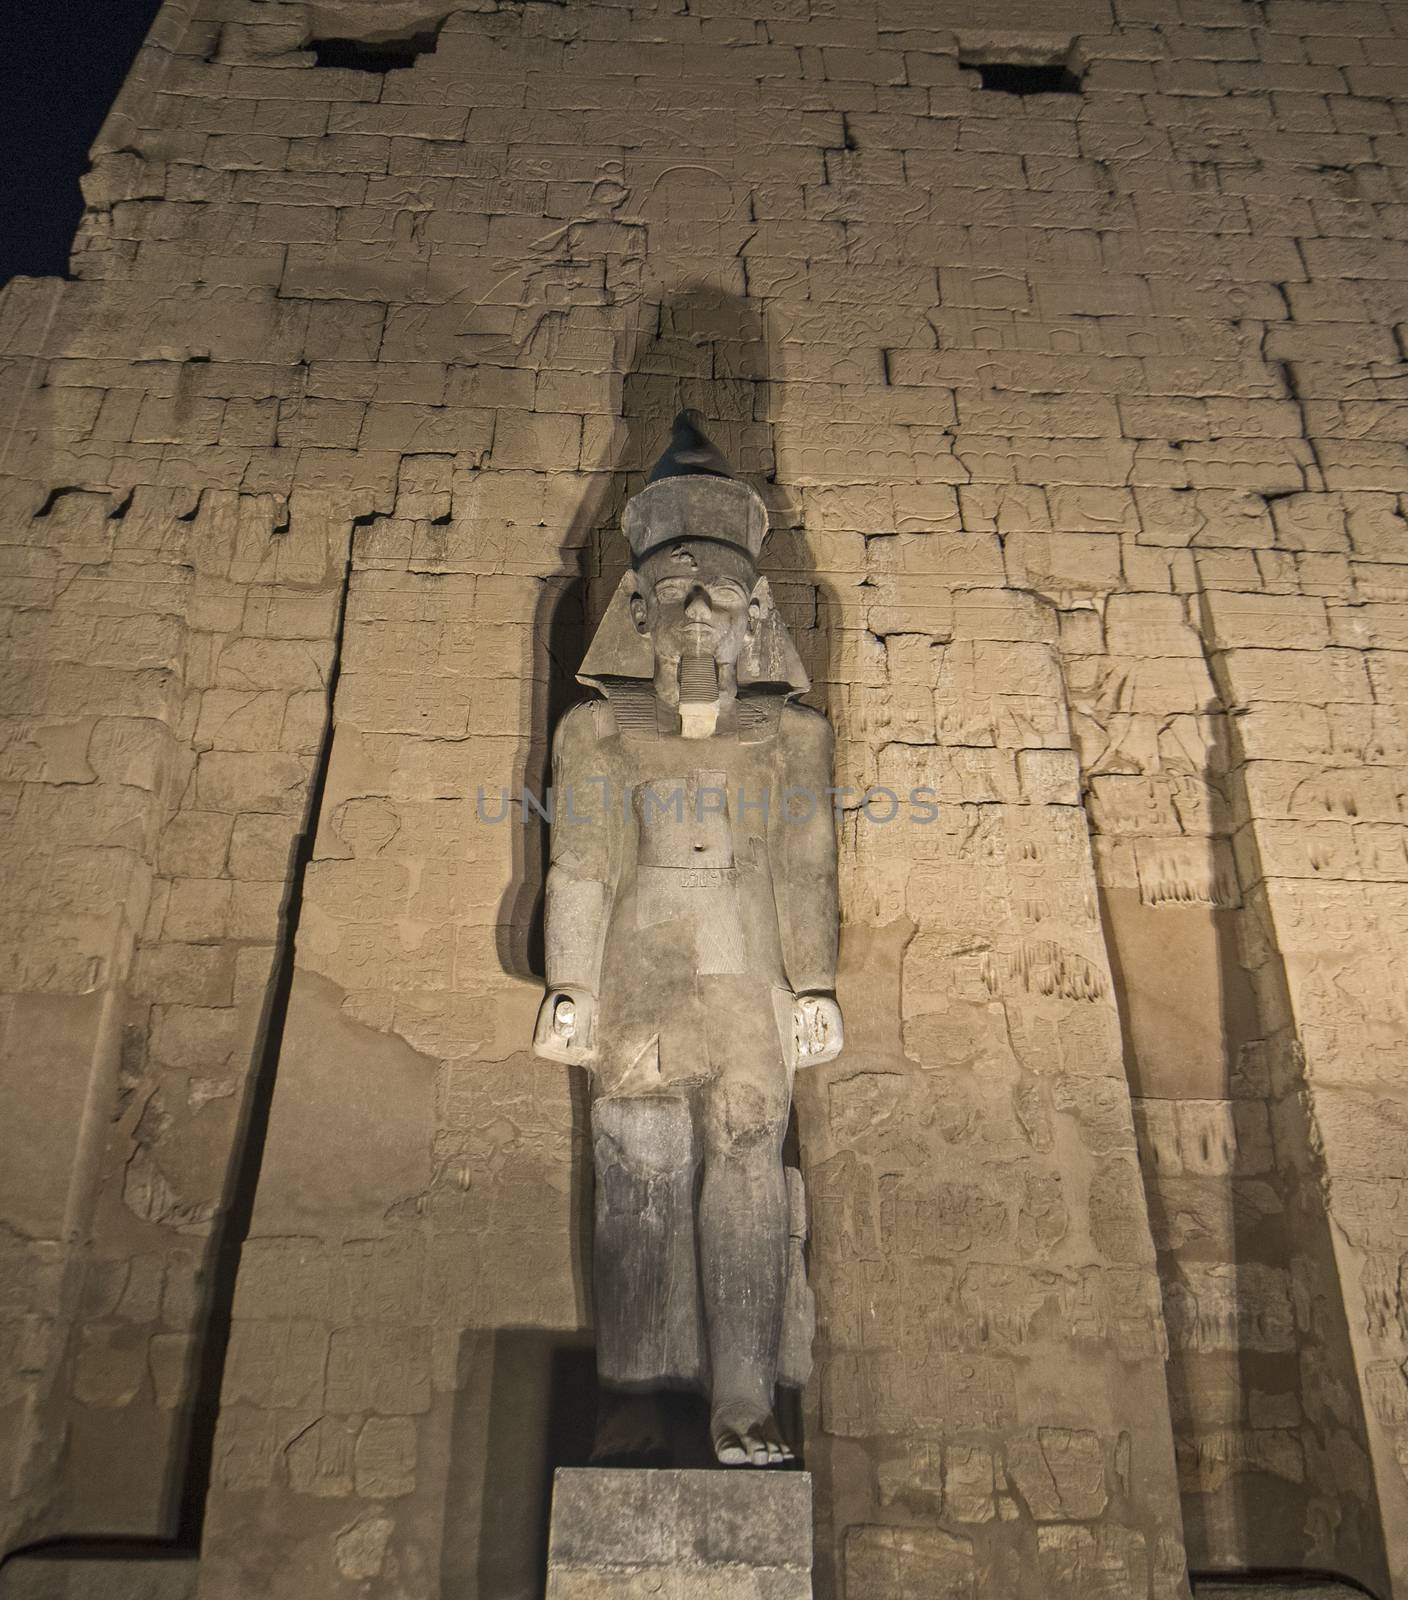 Wall with hieroglyphic carvings and statue of Ramses II in ancient egyptian Luxor Temple at night